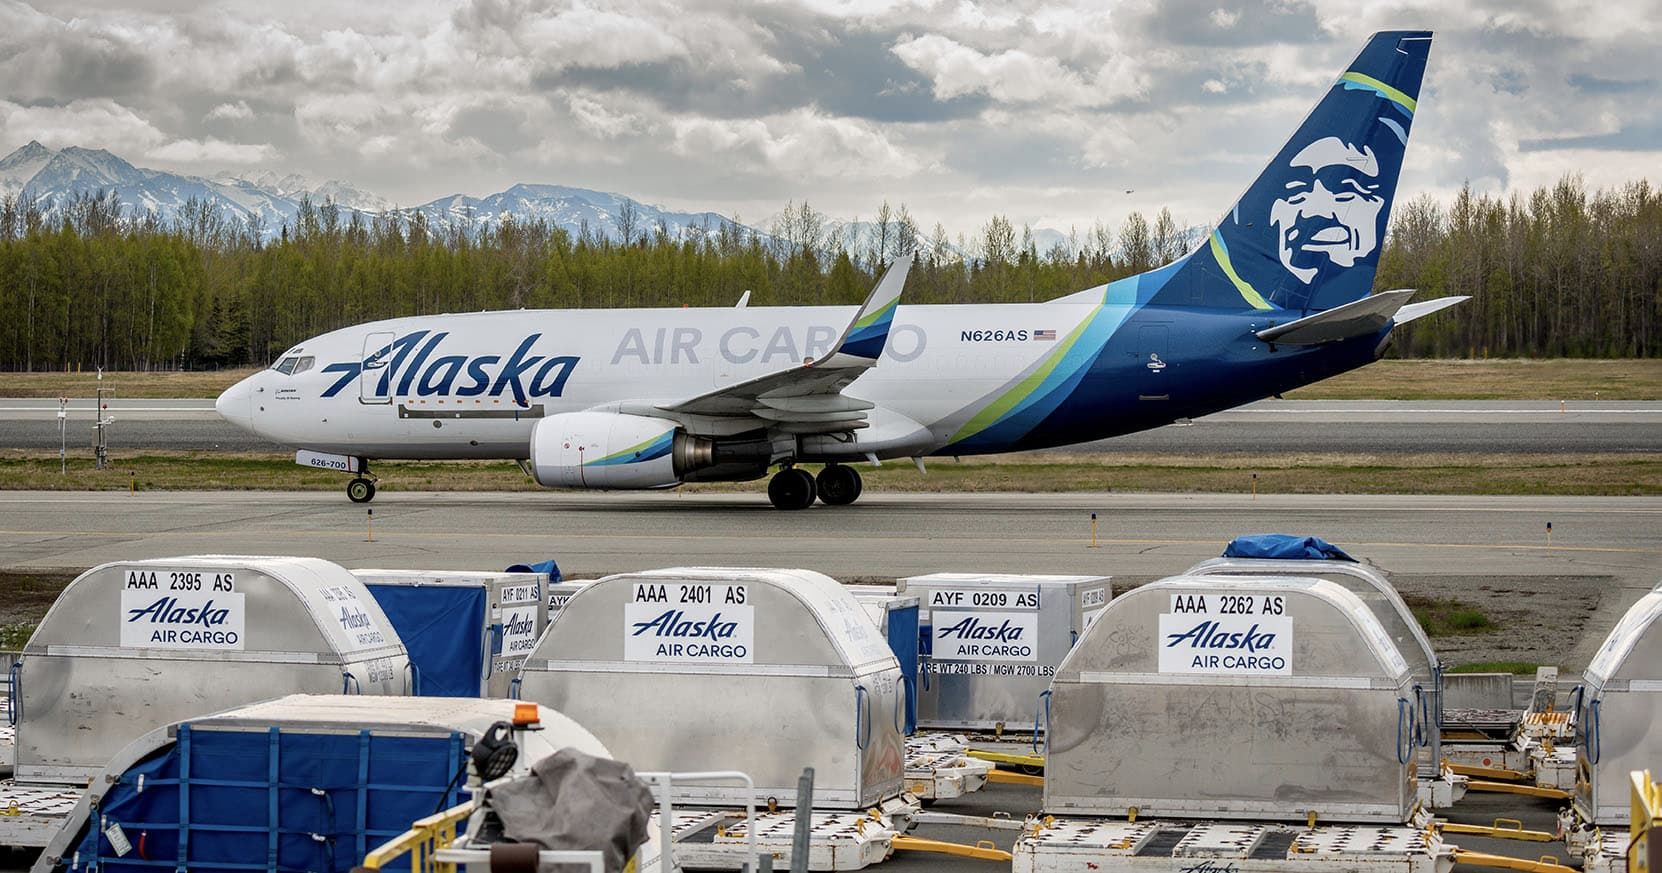 An Alaska Airlines Boeing 737-700 Freighter taxiing behind Alaska Air Cargo containers.